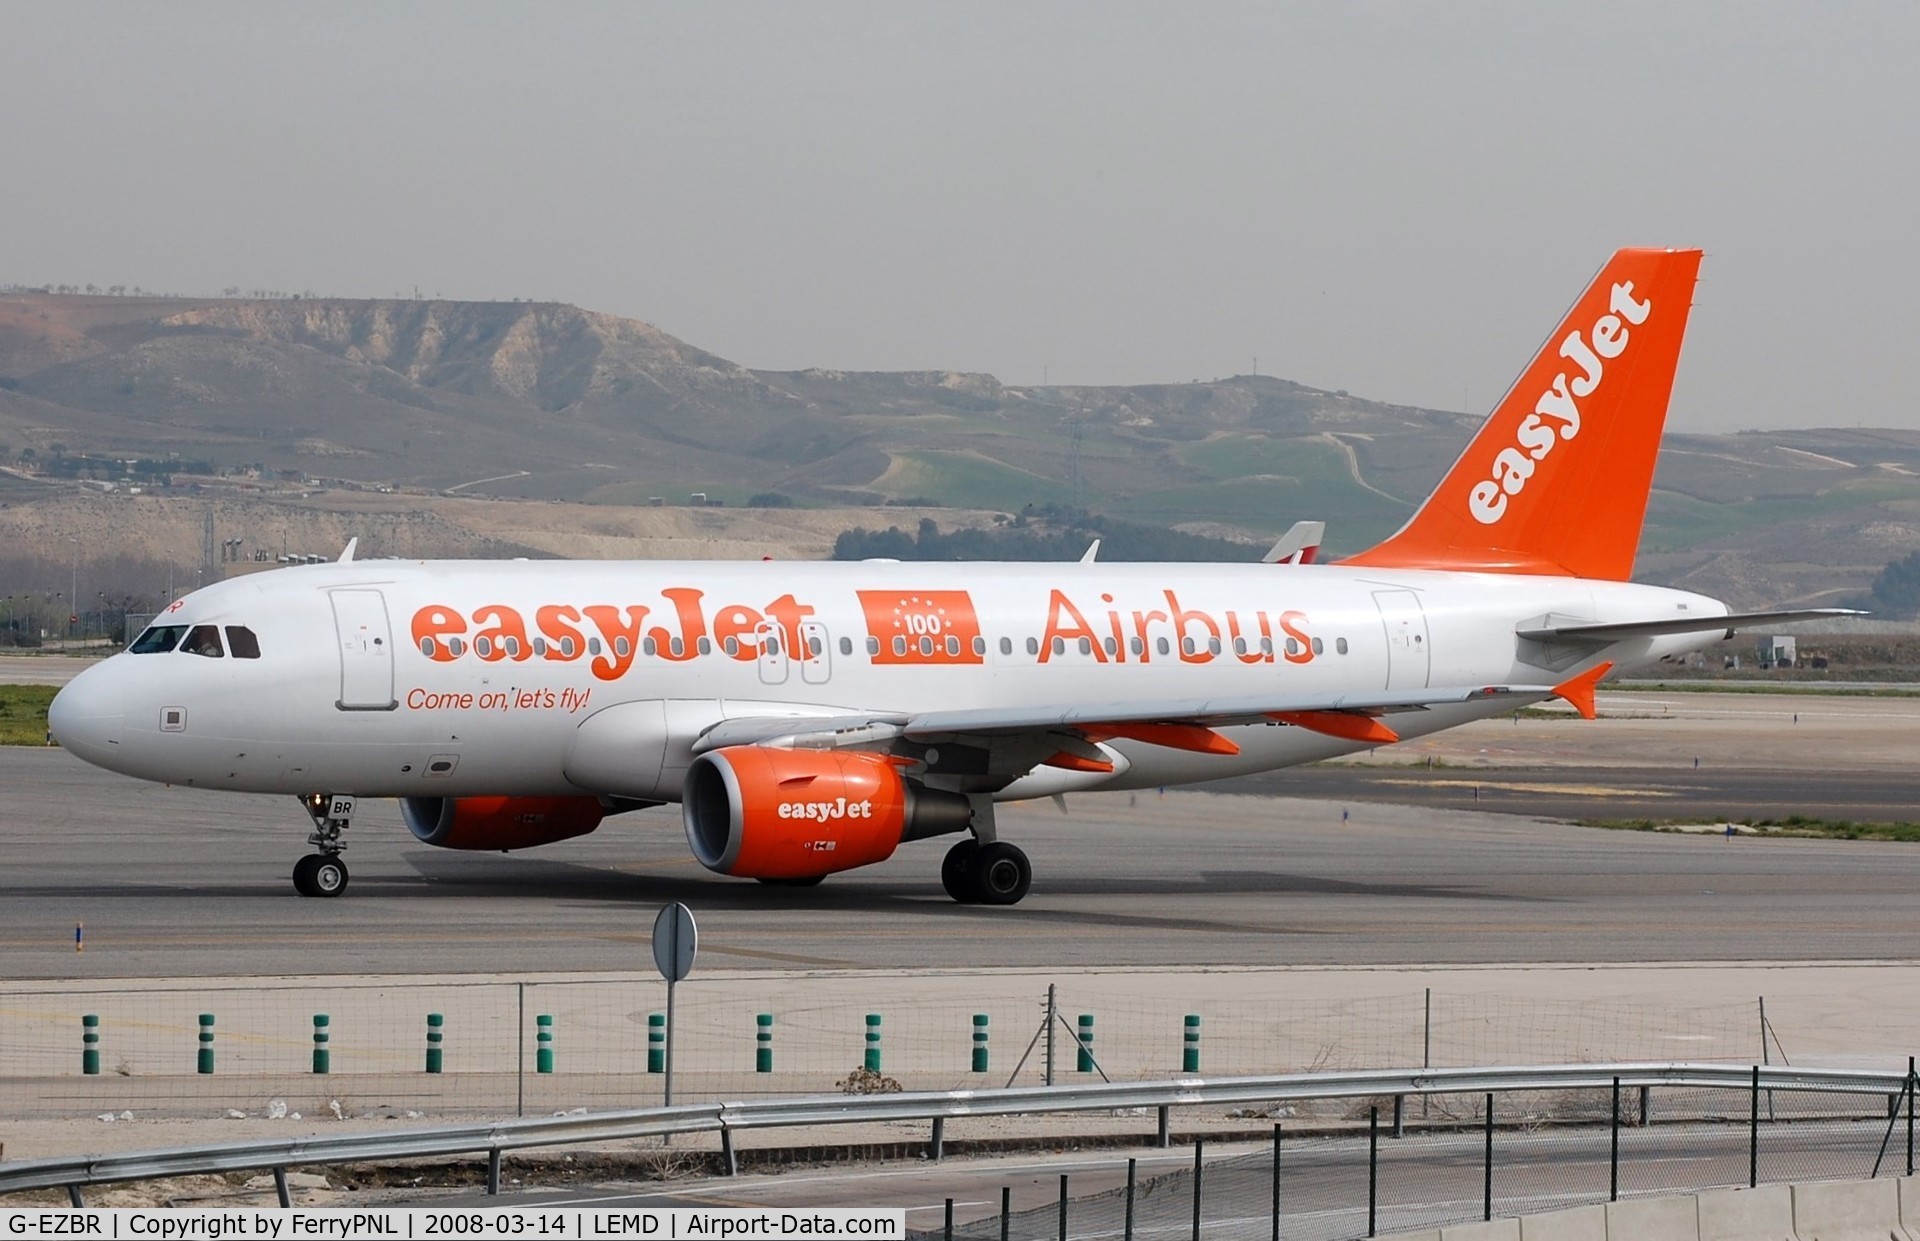 G-EZBR, 2007 Airbus A319-111 C/N 3088, Easyjet A319 with its 100th Airbus plane.